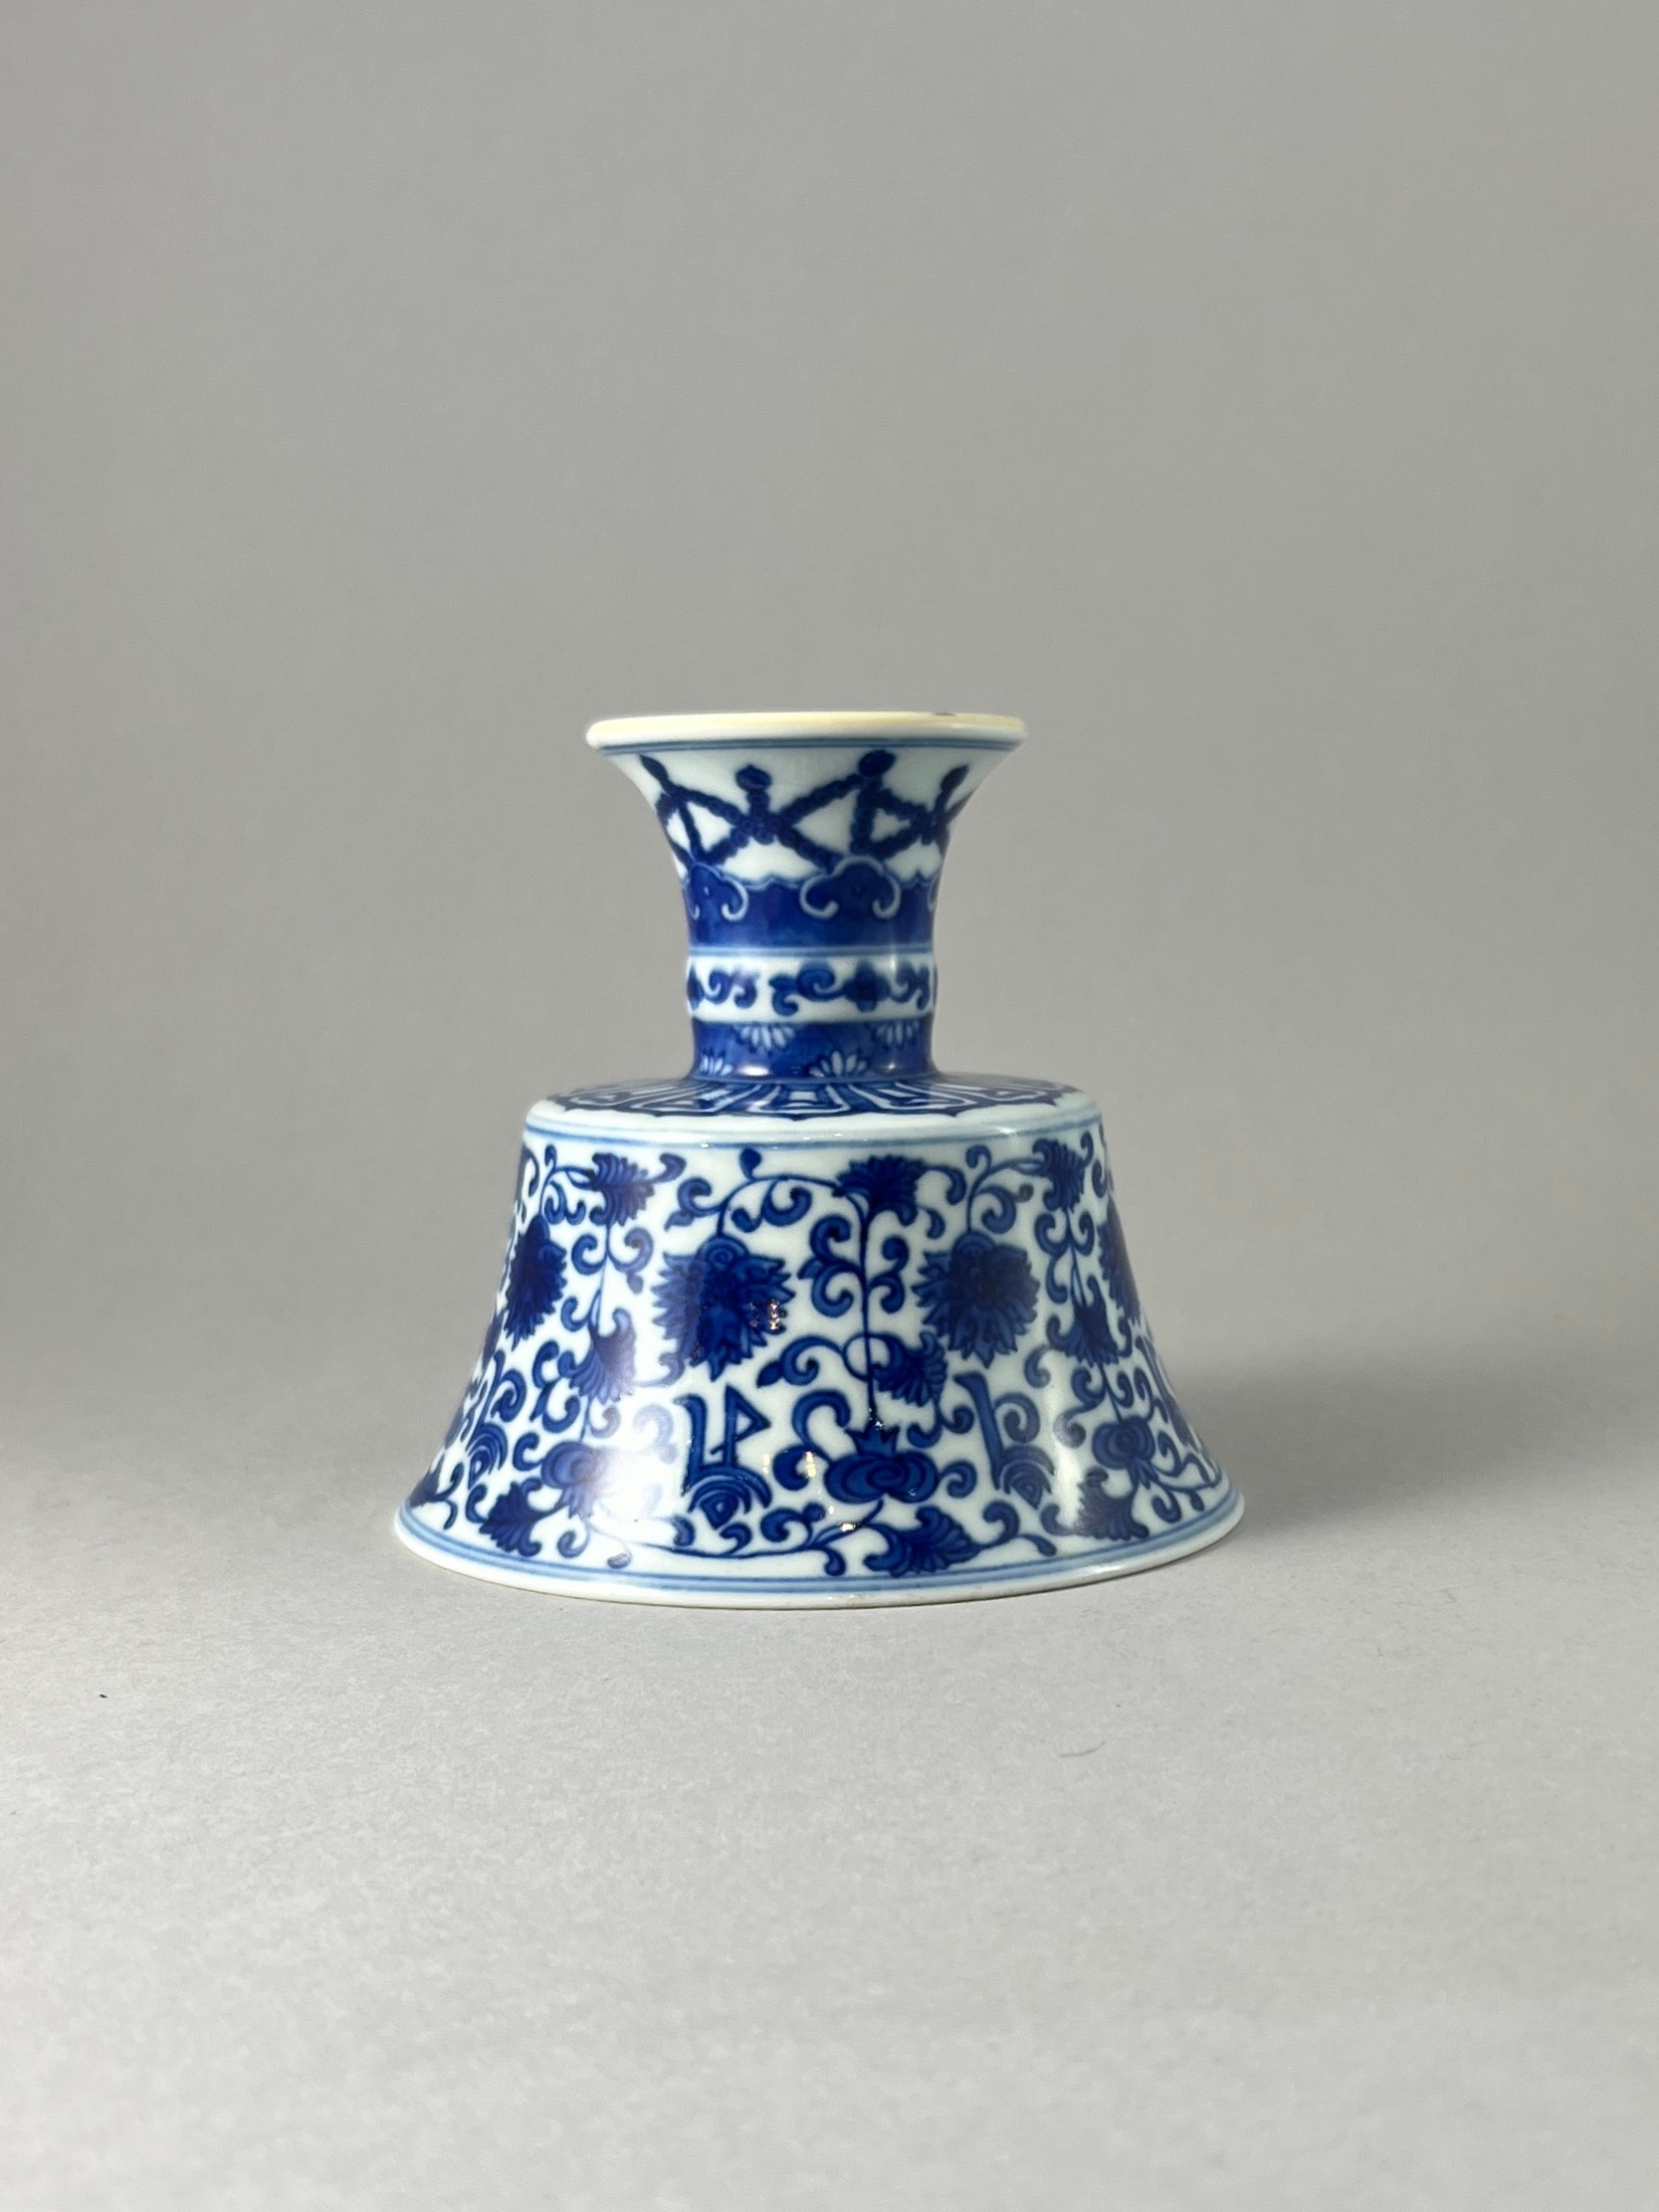 A Blue and White Stembowl, six character mark of Qianlong W:12.6cm well painted in Ming style, - Image 3 of 5